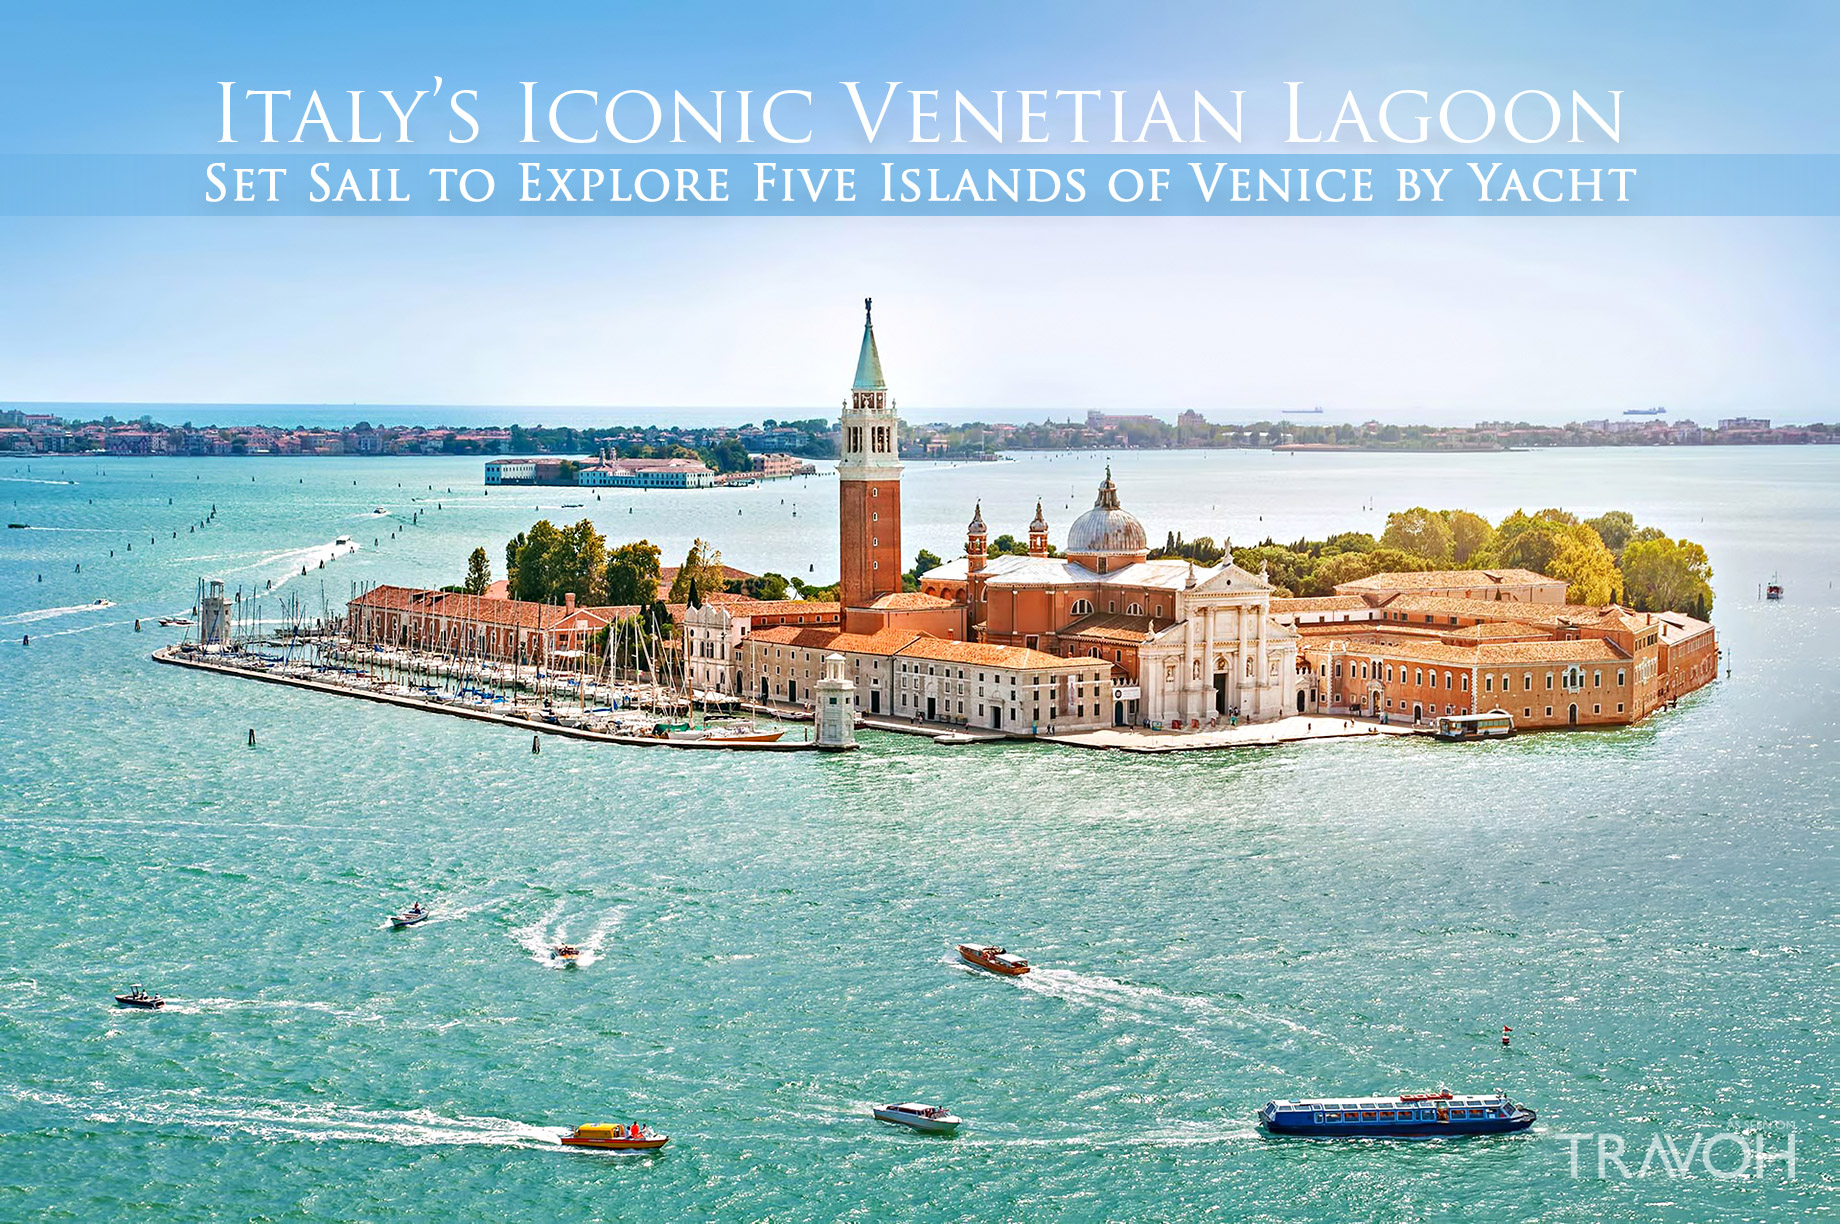 Italy's Iconic Venetian Lagoon - Set Sail to Explore Five Islands of Venice by Yacht